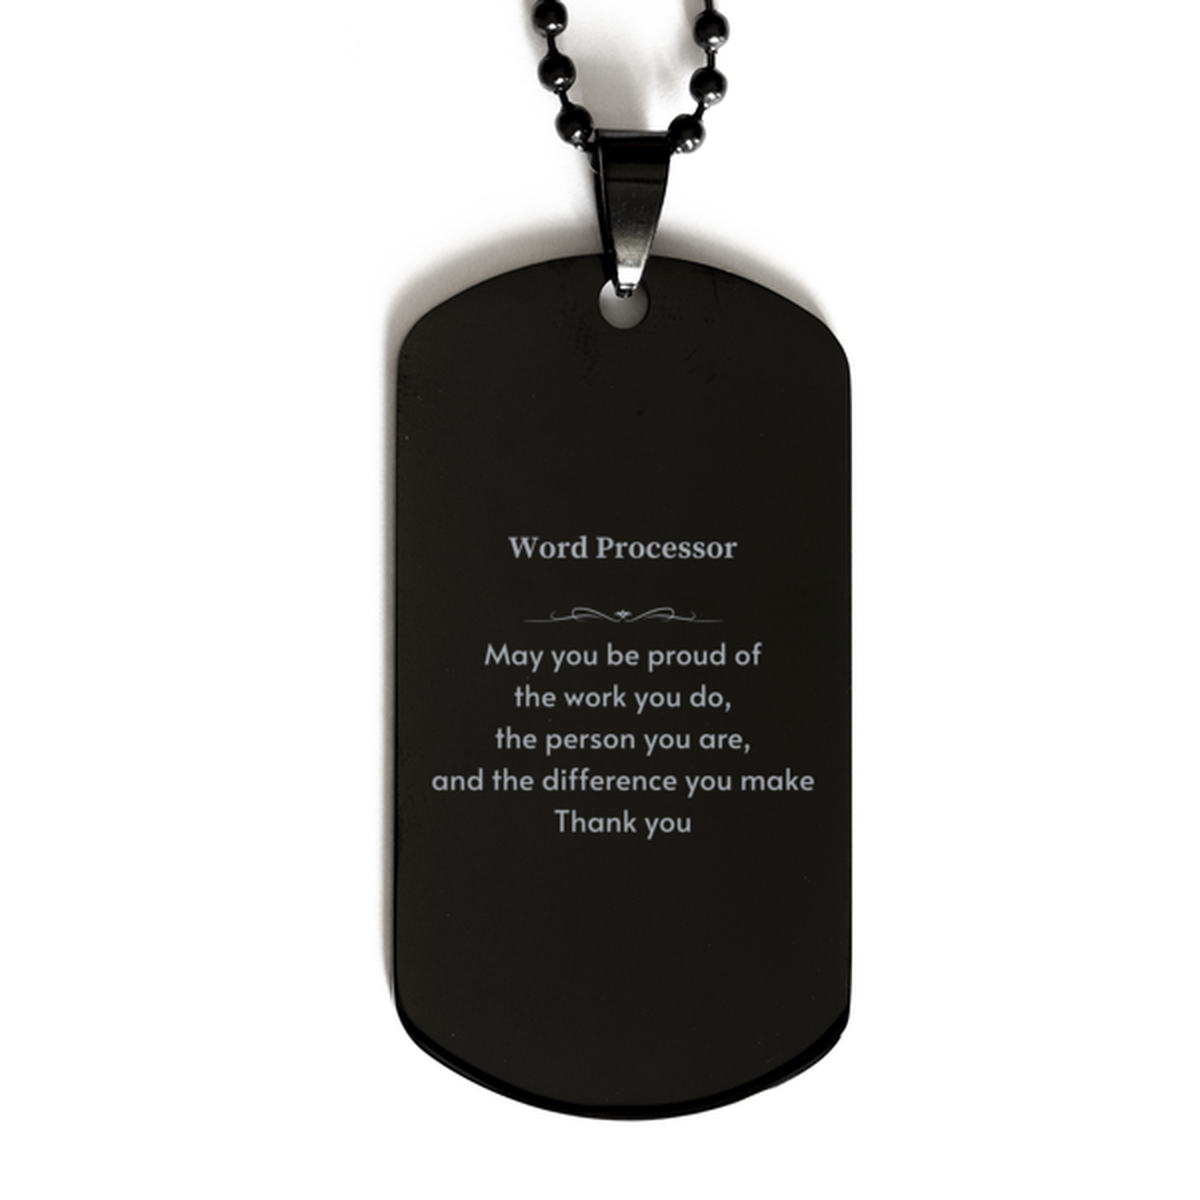 Heartwarming Black Dog Tag Retirement Coworkers Gifts for Word Processor, Word Processor May You be proud of the work you do, the person you are Gifts for Boss Men Women Friends